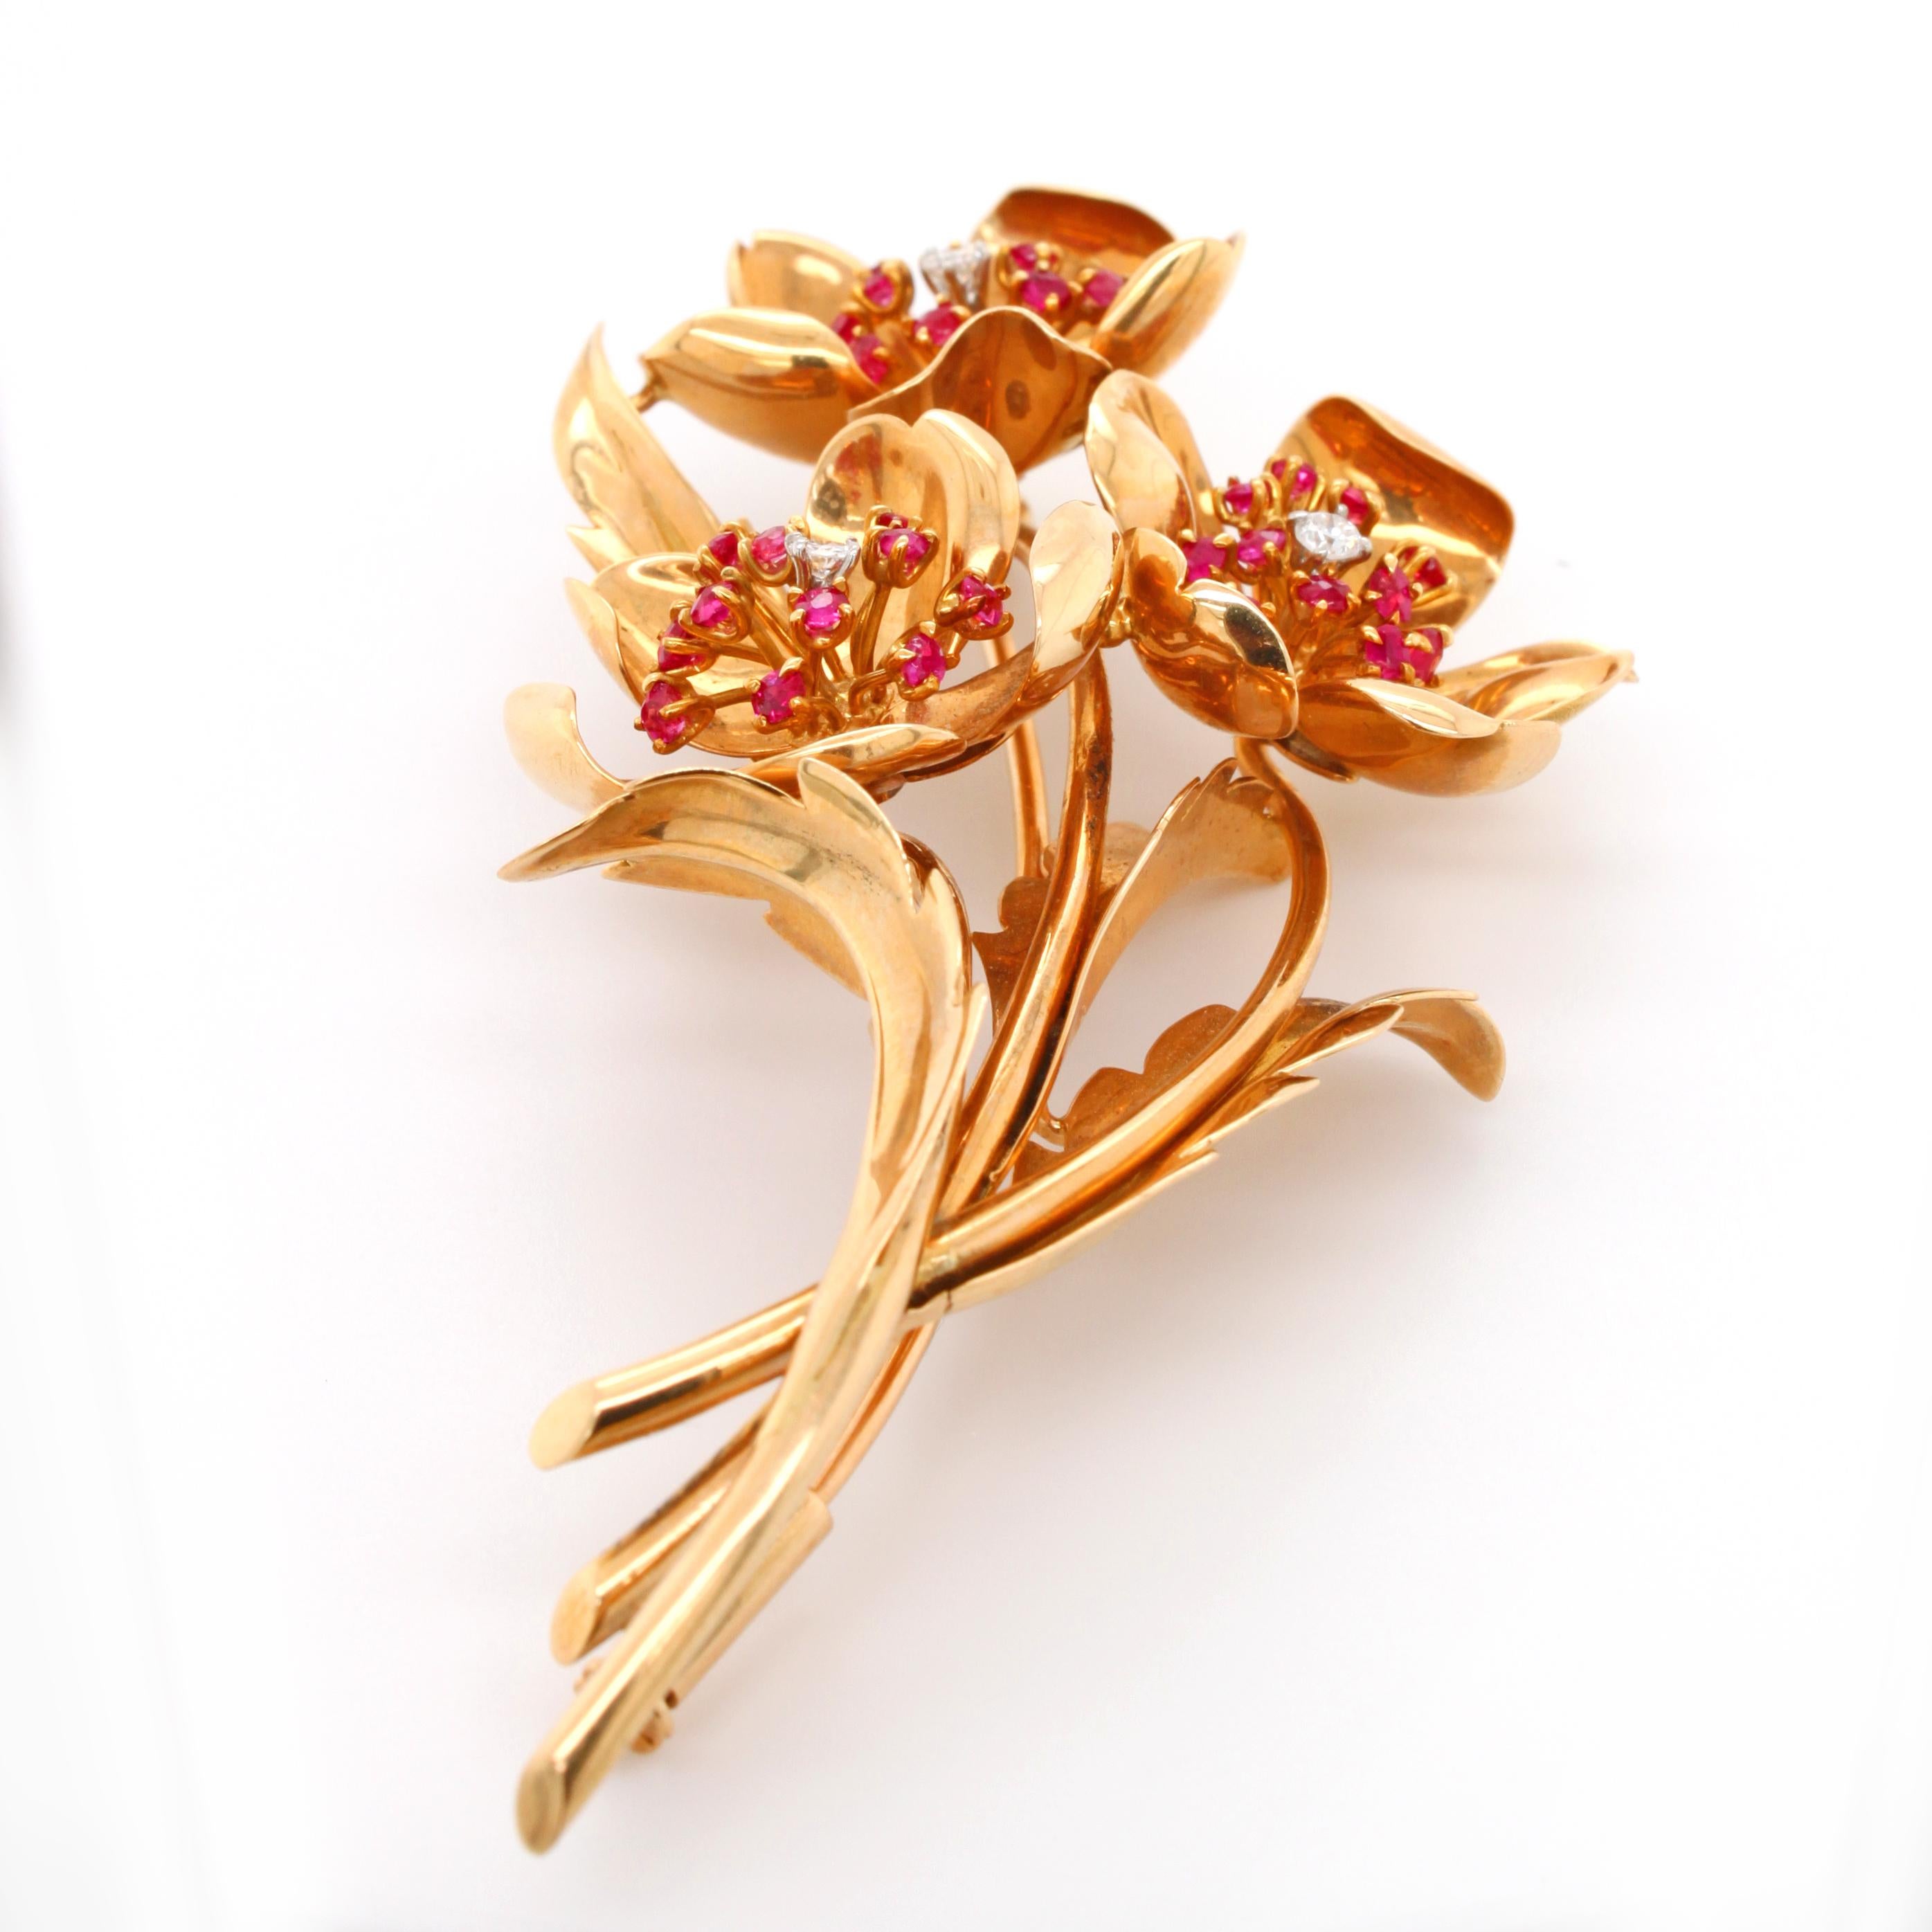 A beautiful brooch in the form of a buttercup flower realistically made in yellow gold. The pistil and stamen are set with diamonds and rubies. The brooch has the 18k gold stamp and makers marks.

The buttercup flower is a joyful flower and